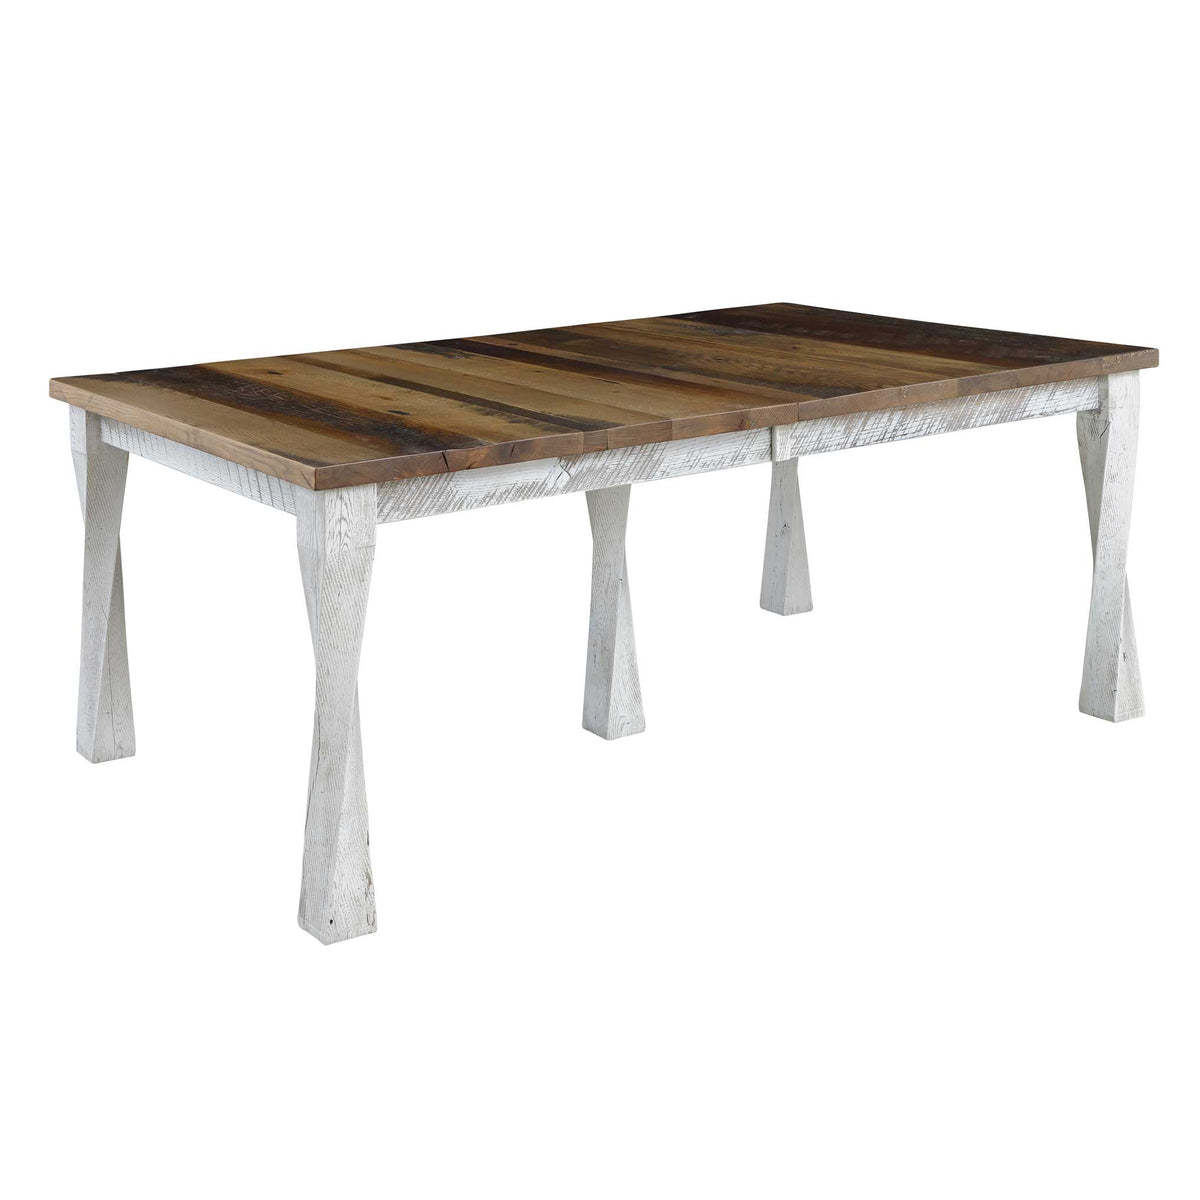 Amish Wynfield Rustic Leg Dining Table Set for 6 - snyders.furniture